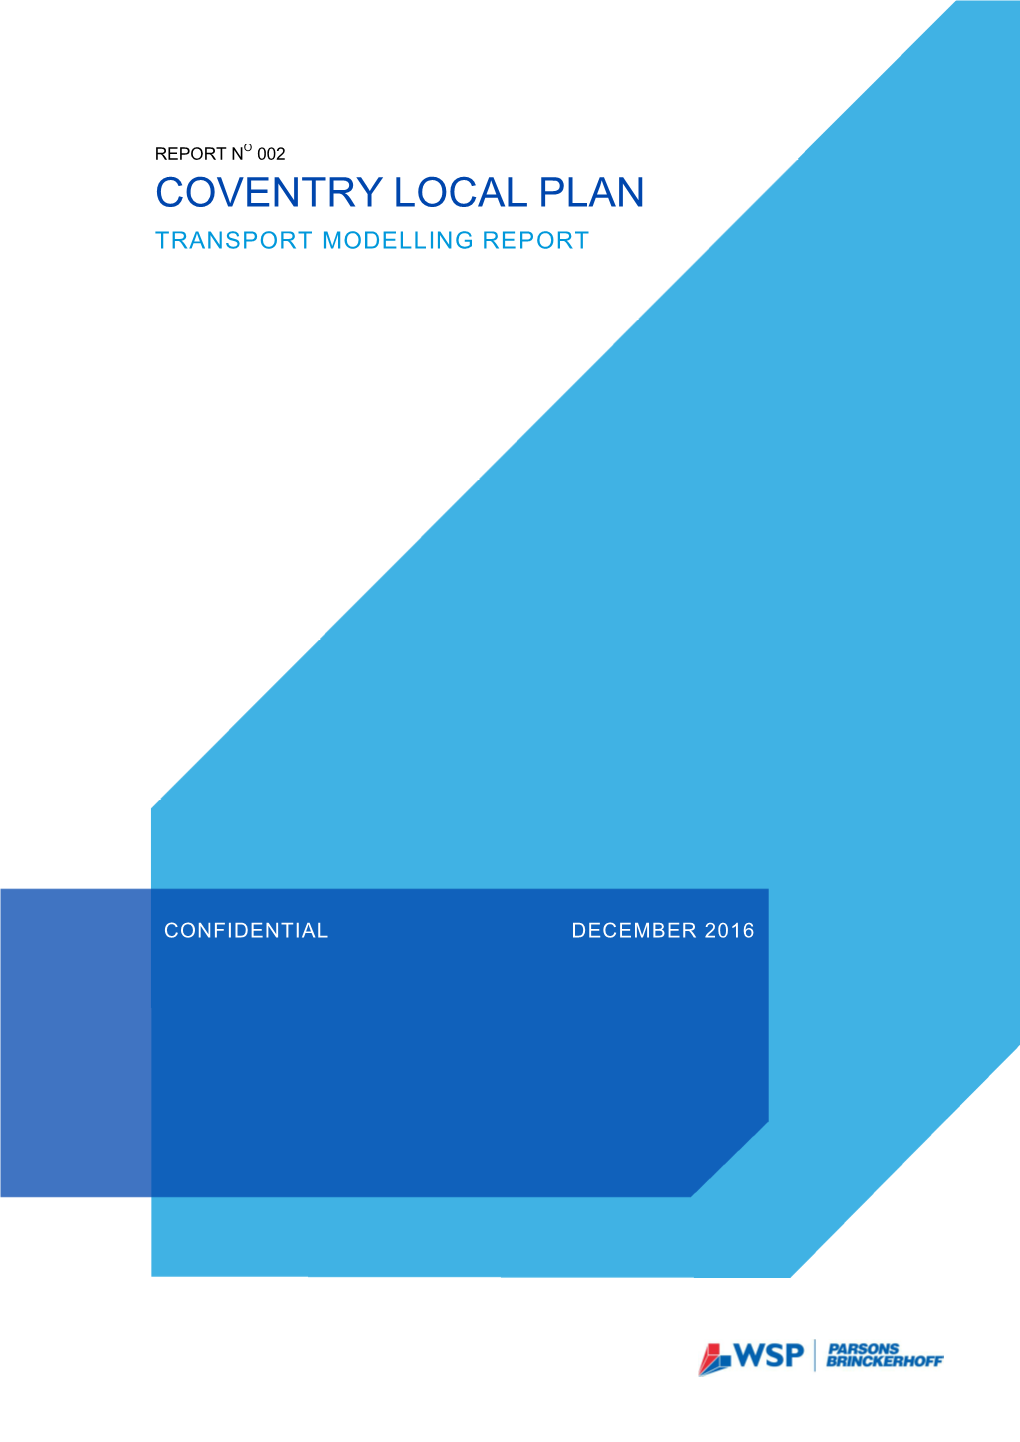 Coventry Local Plan Transport Modelling Report